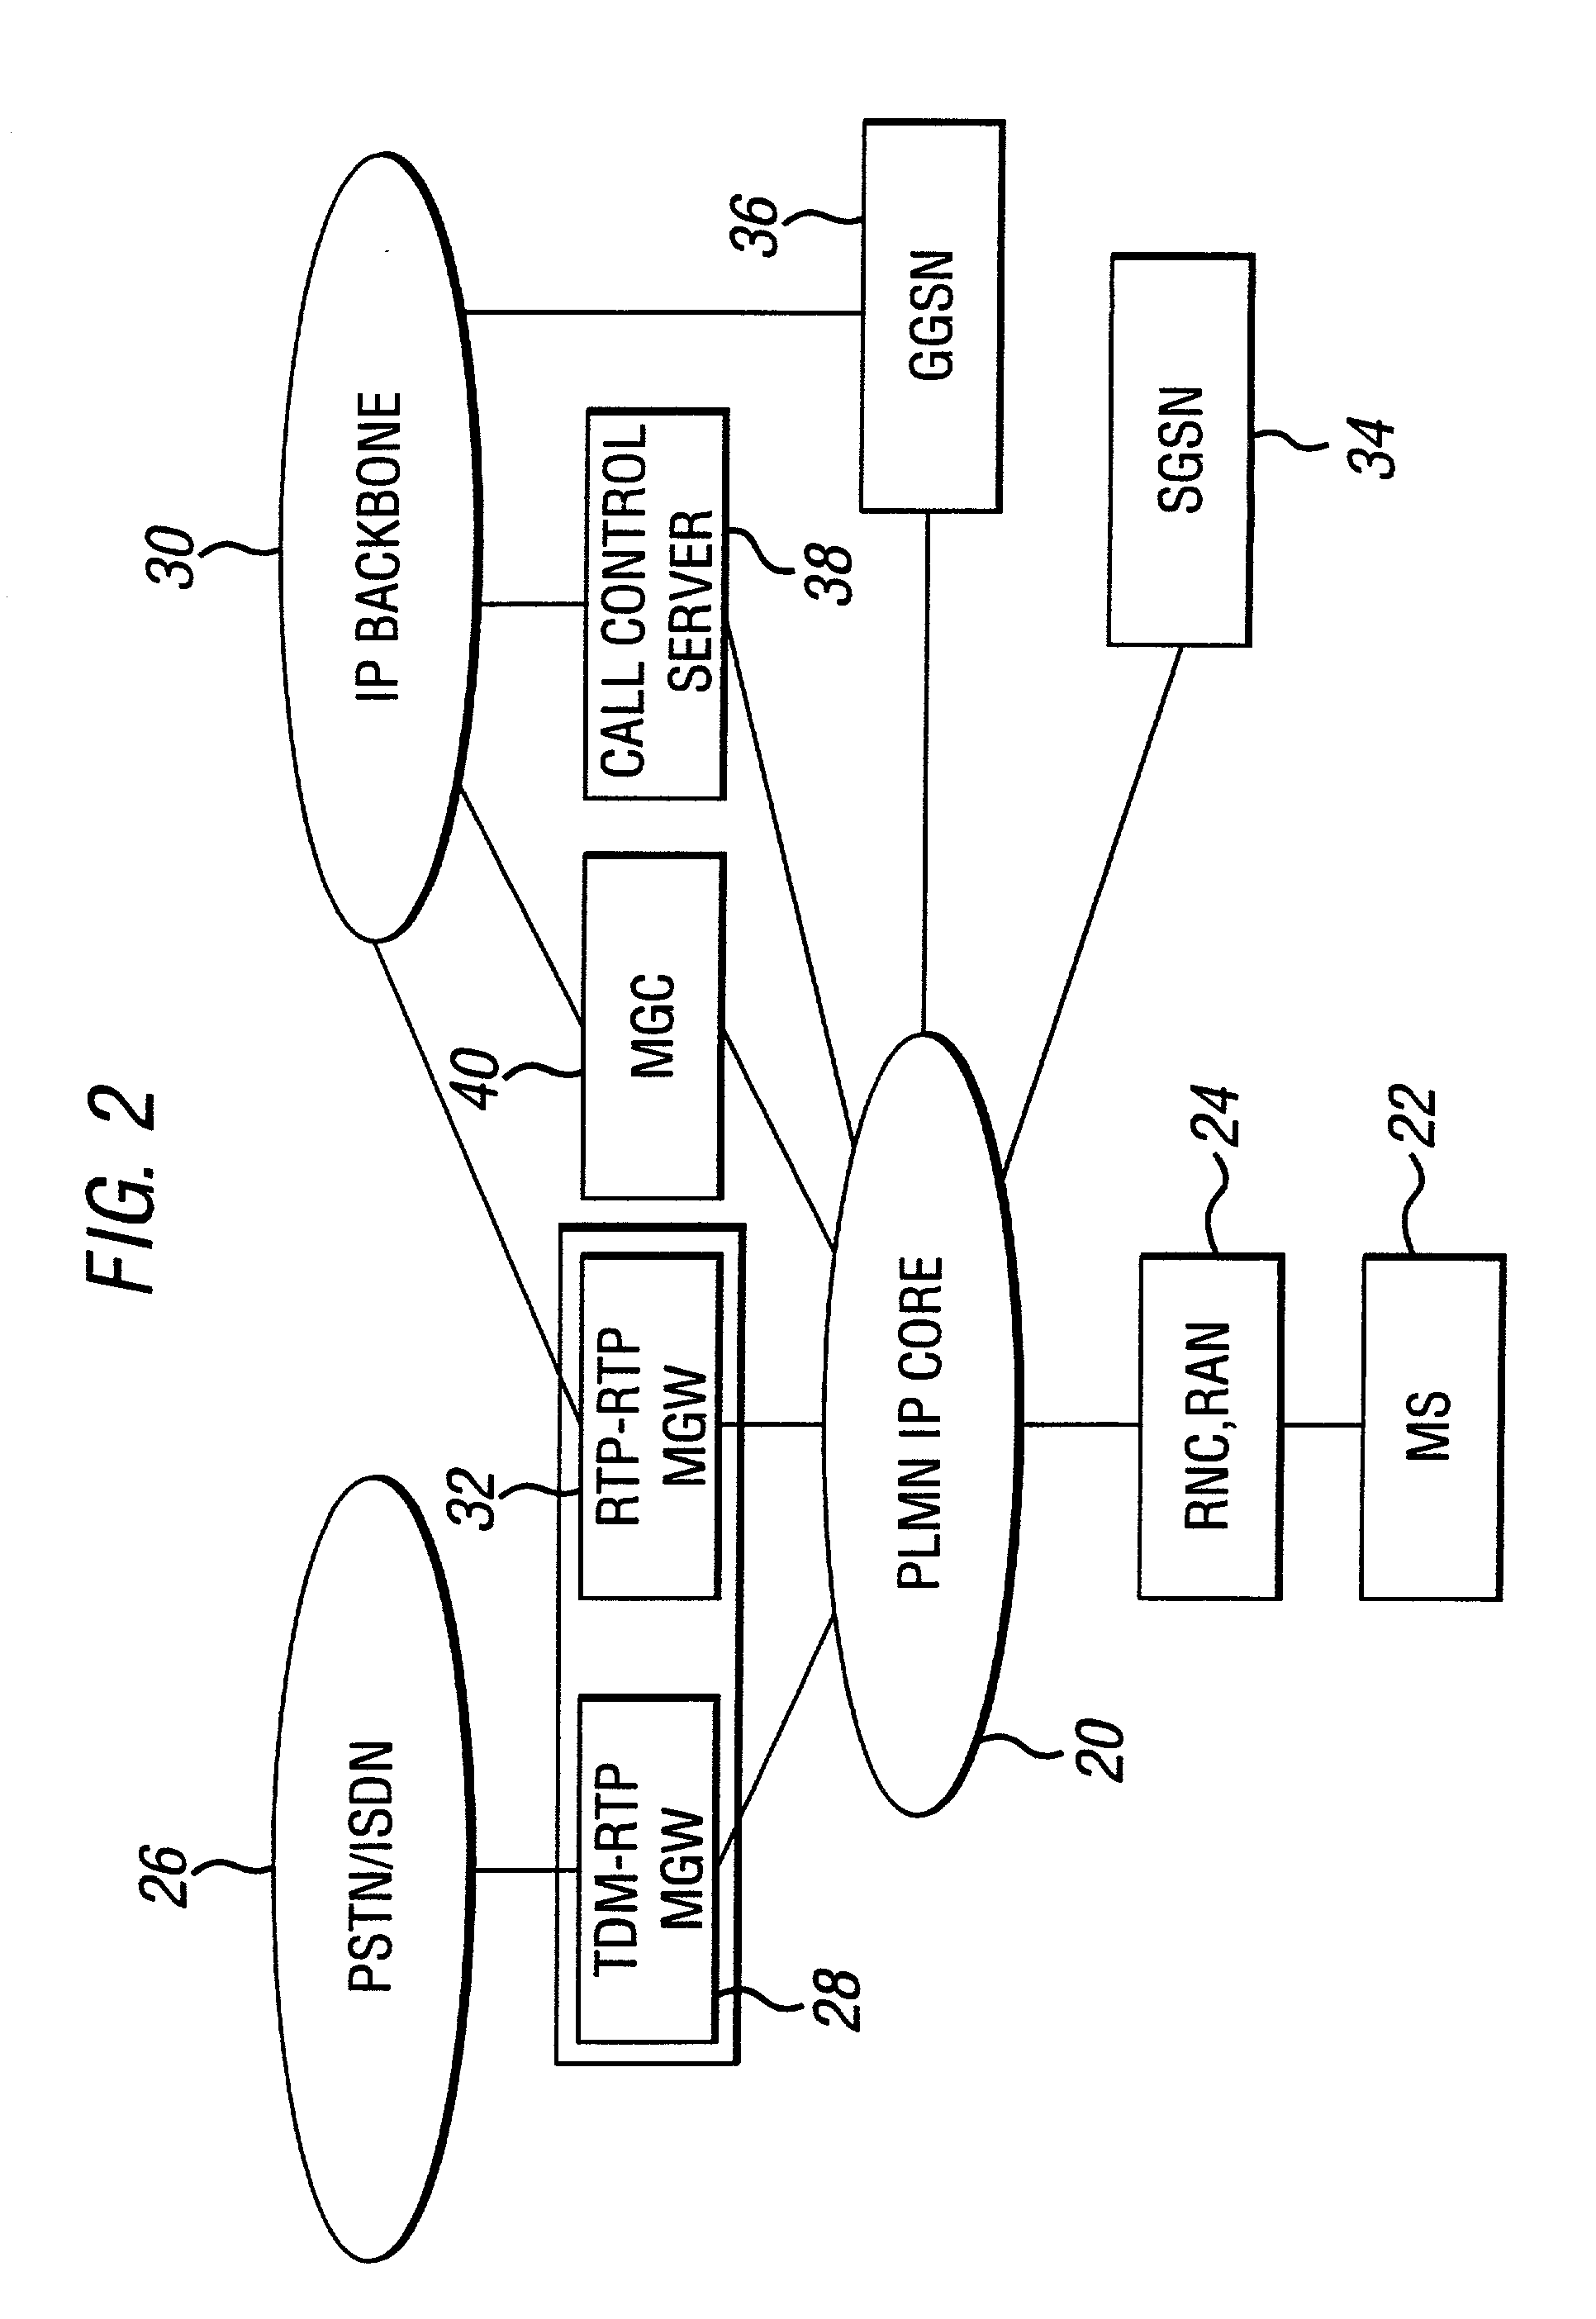 Real time data transmission systems and methods